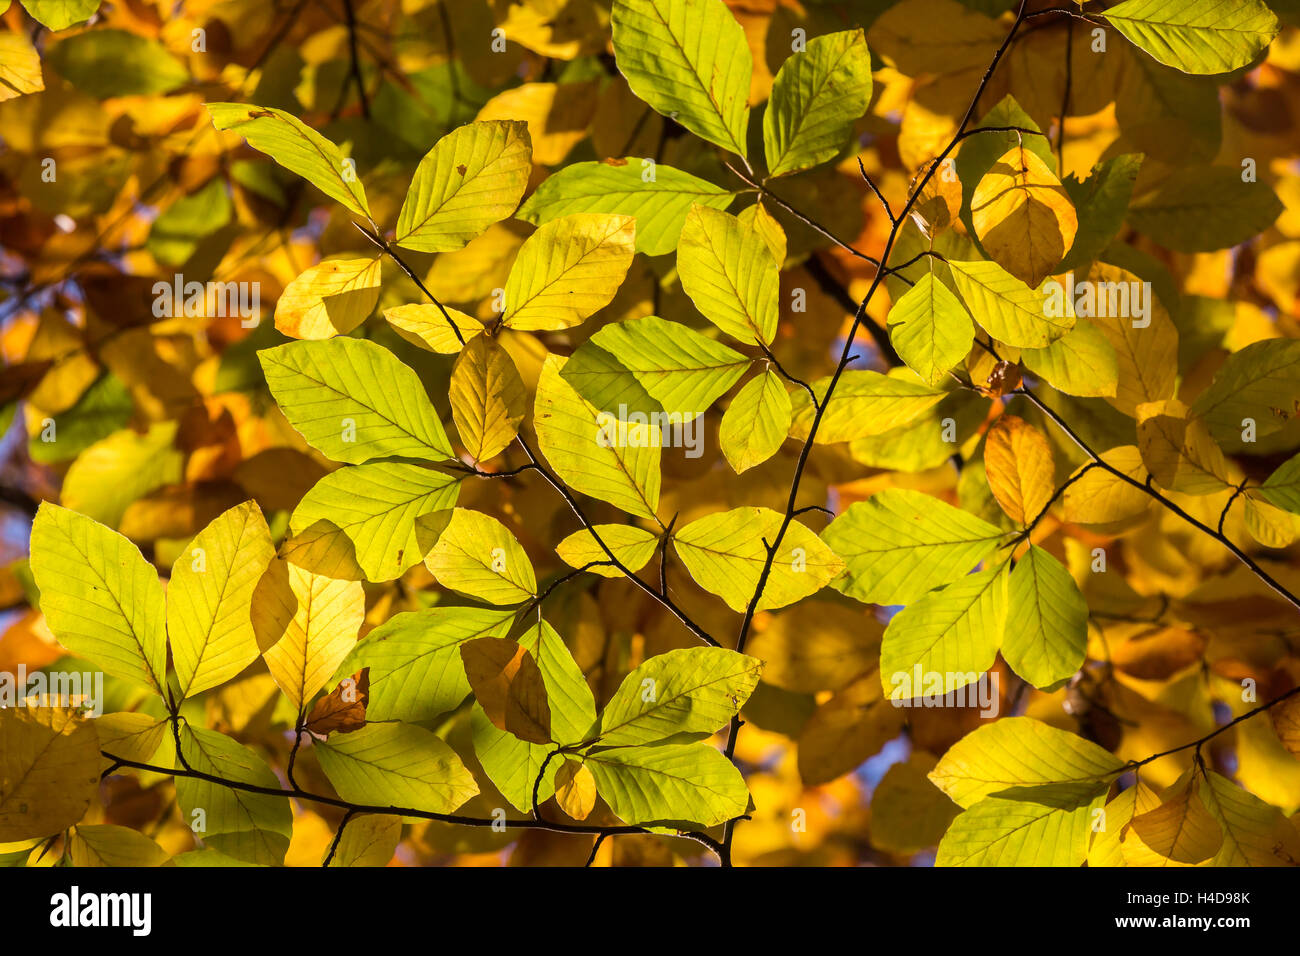 Yellow and Orange Autumn Leaves as Background Stock Photo